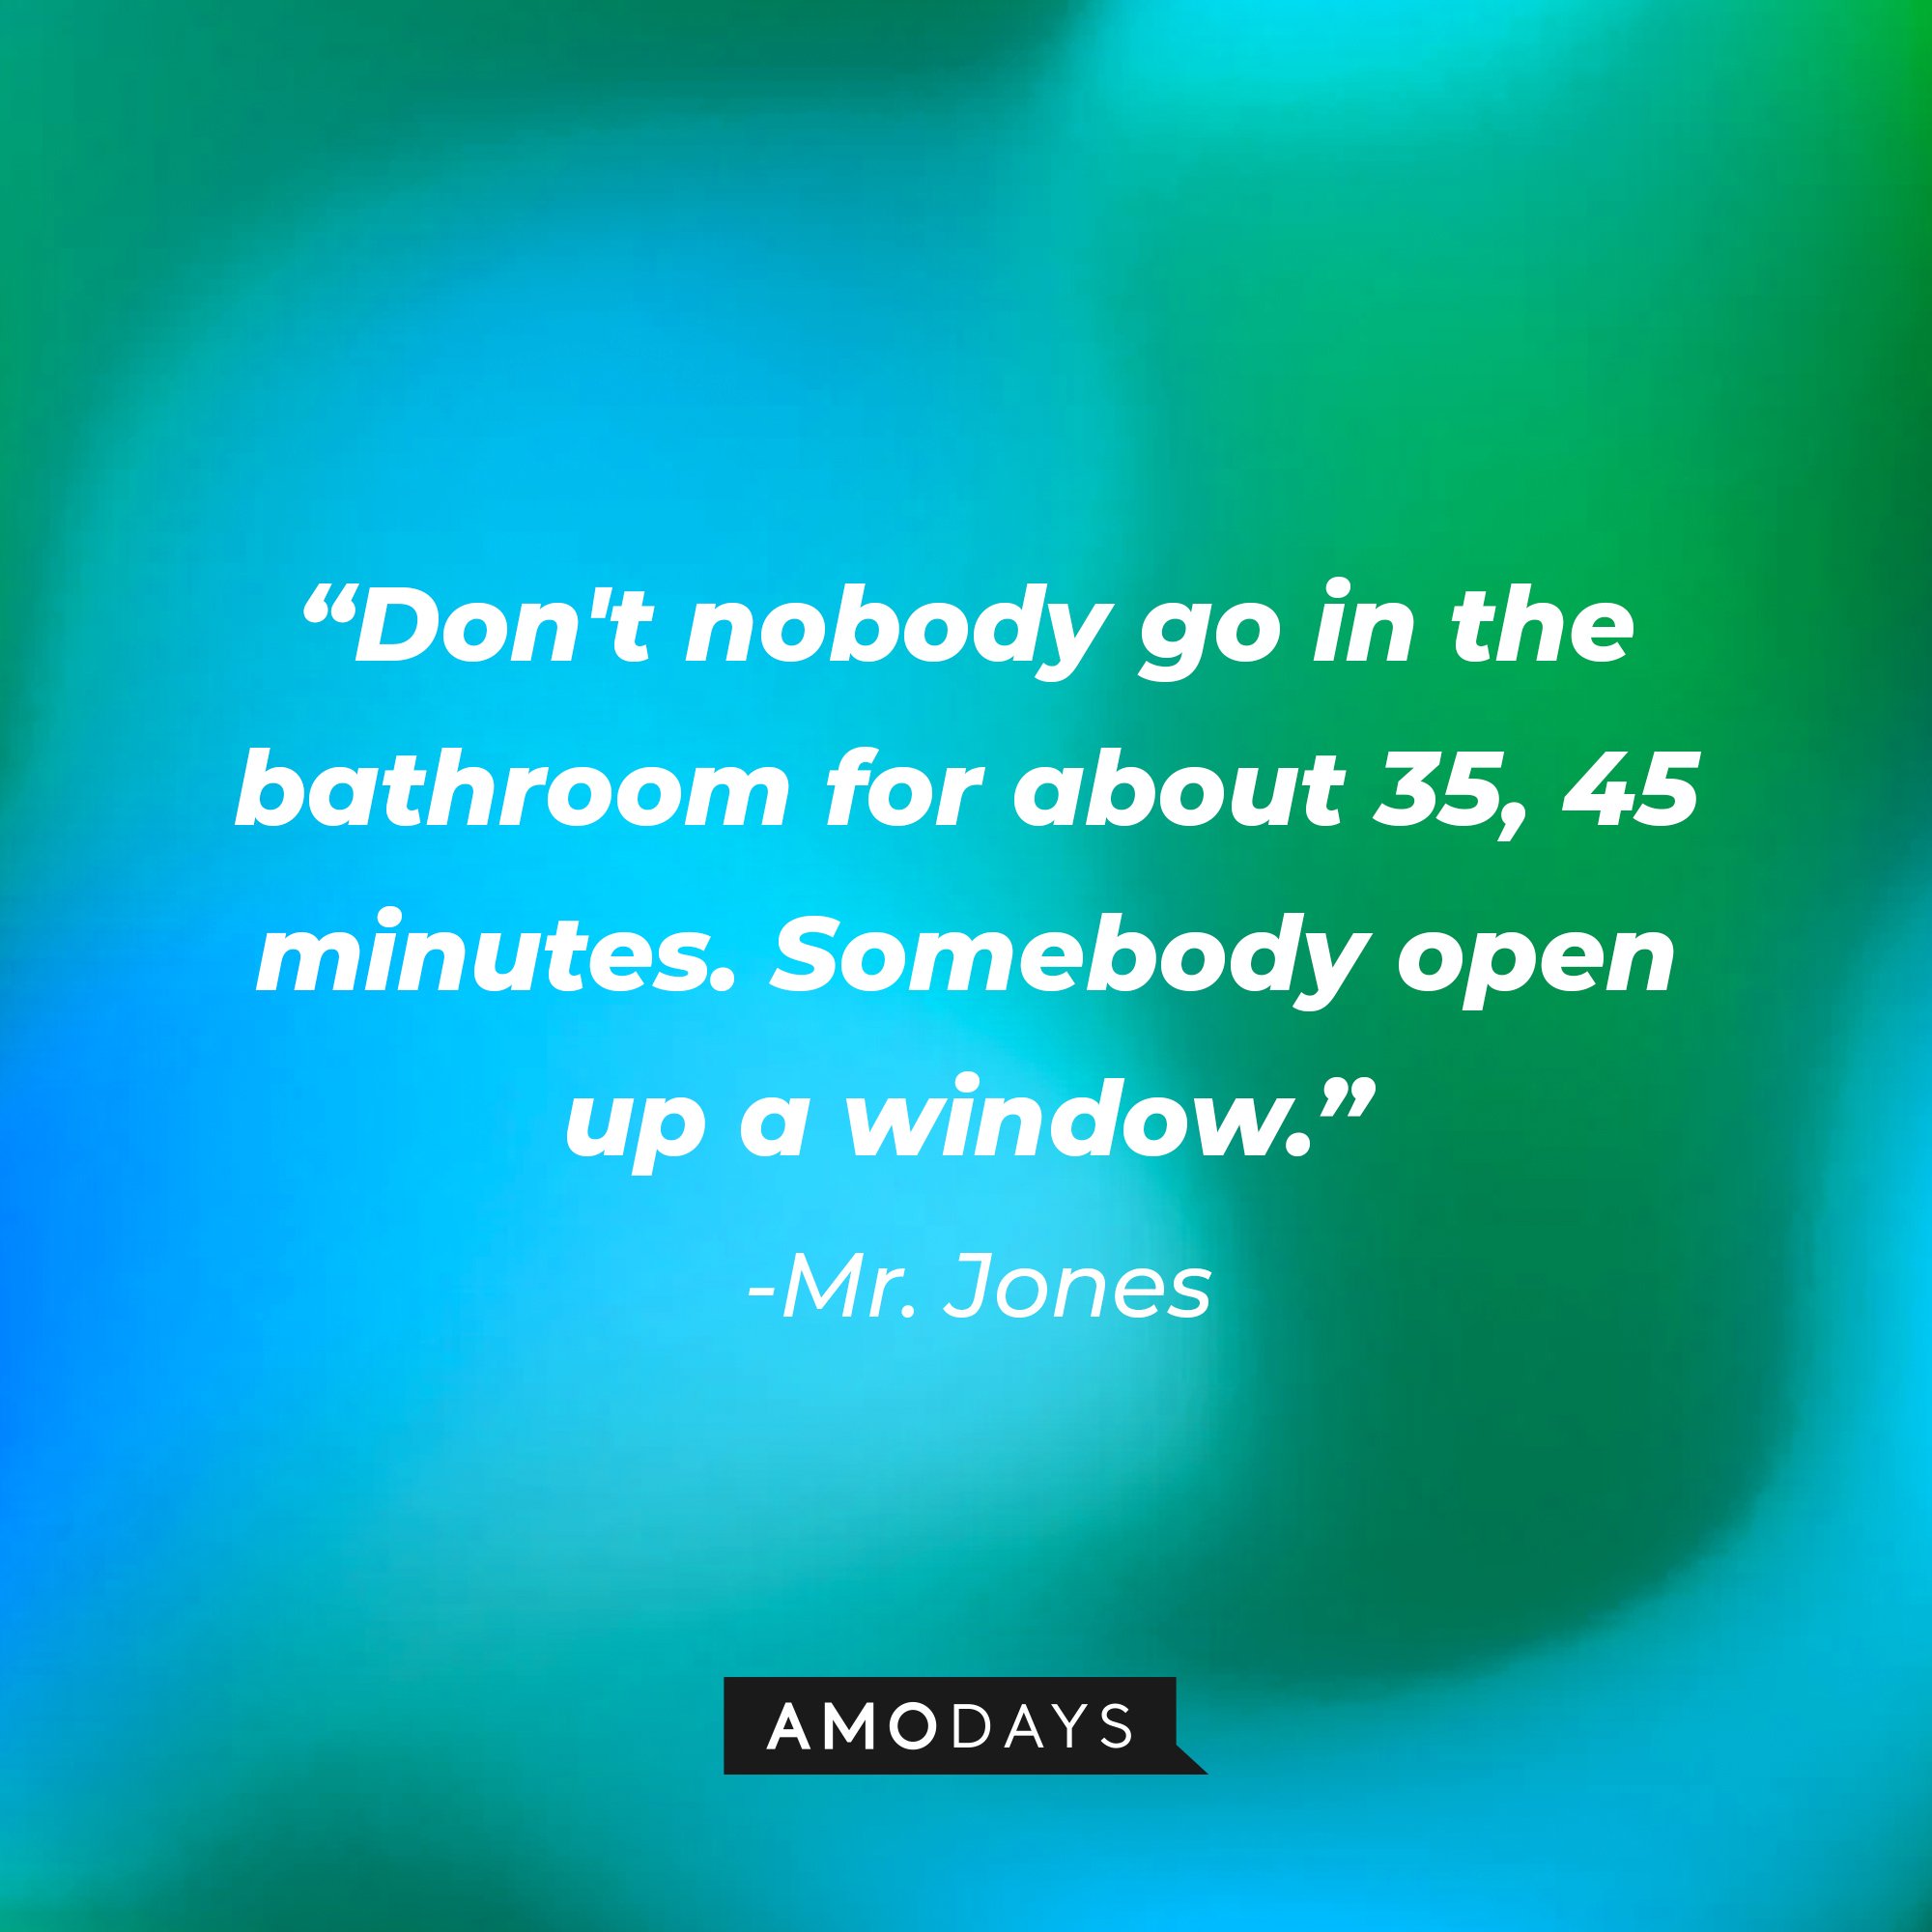  Mr. Jones’ quote: "Don't nobody go in the bathroom for about 35, 45 minutes. Somebody open up a window." | Image: AmoDays